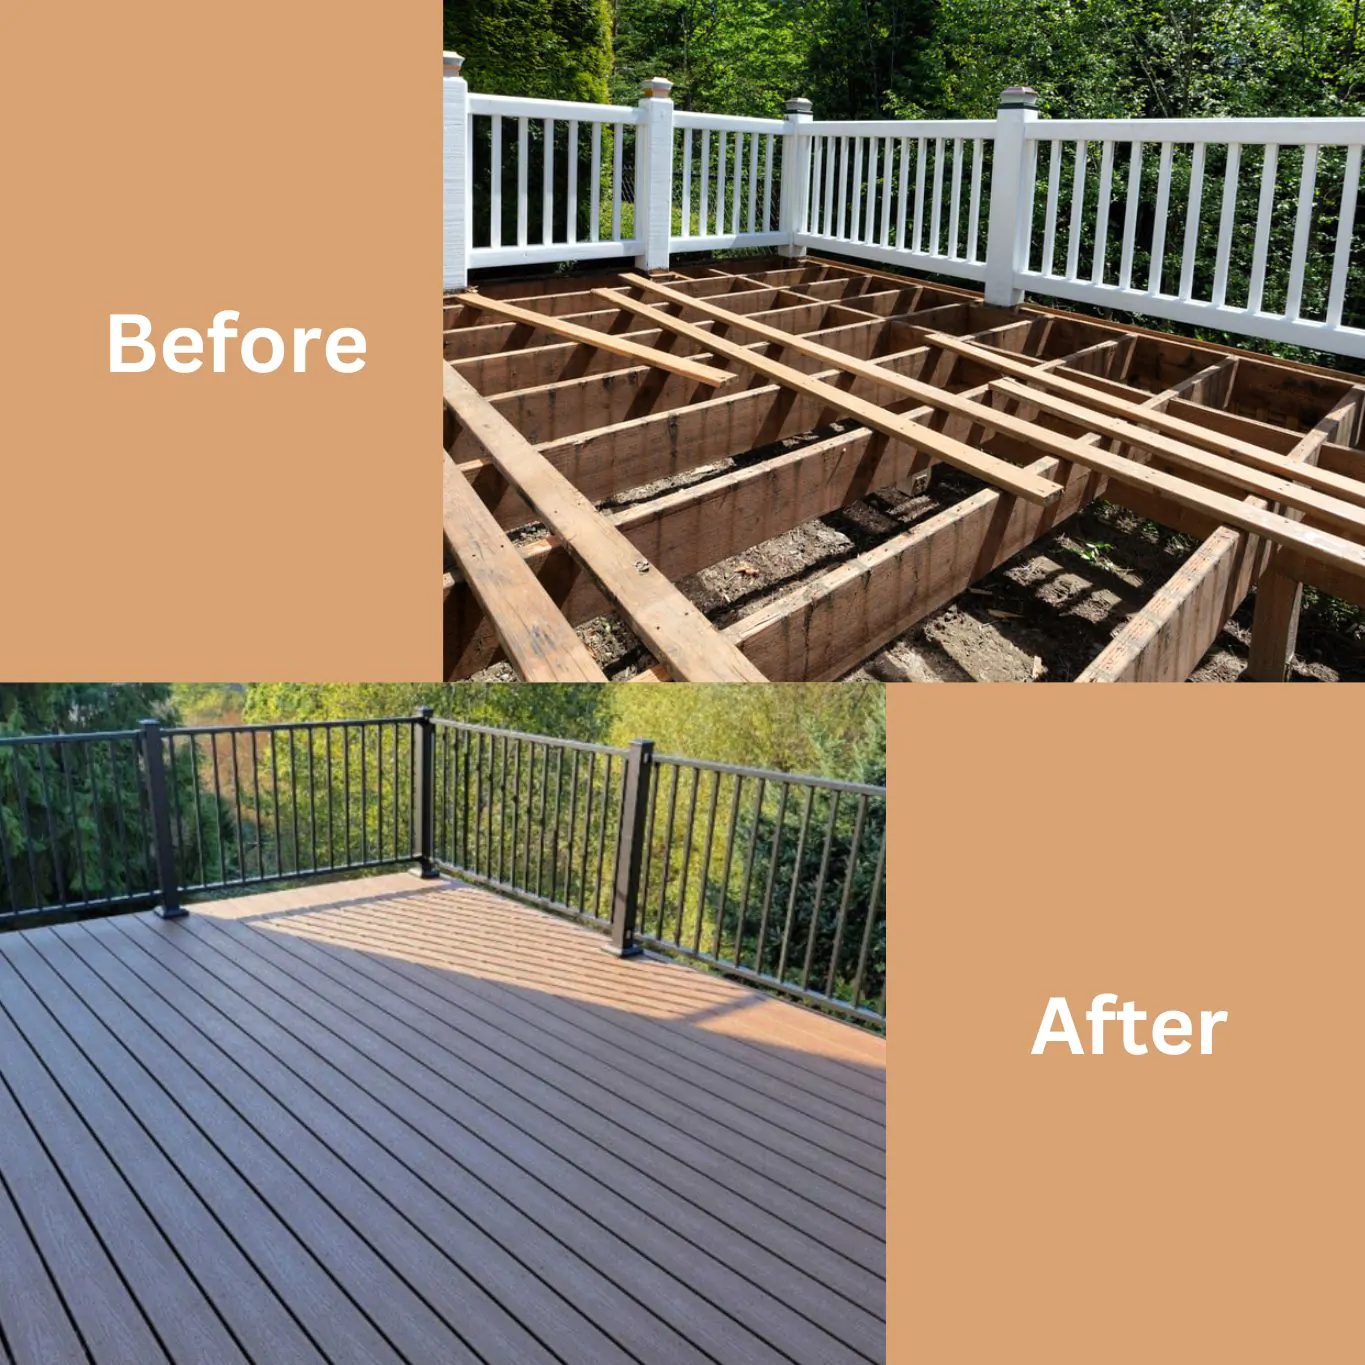 Before and After Deck Installation Services - All Pro Cherry Hill Deck Builders